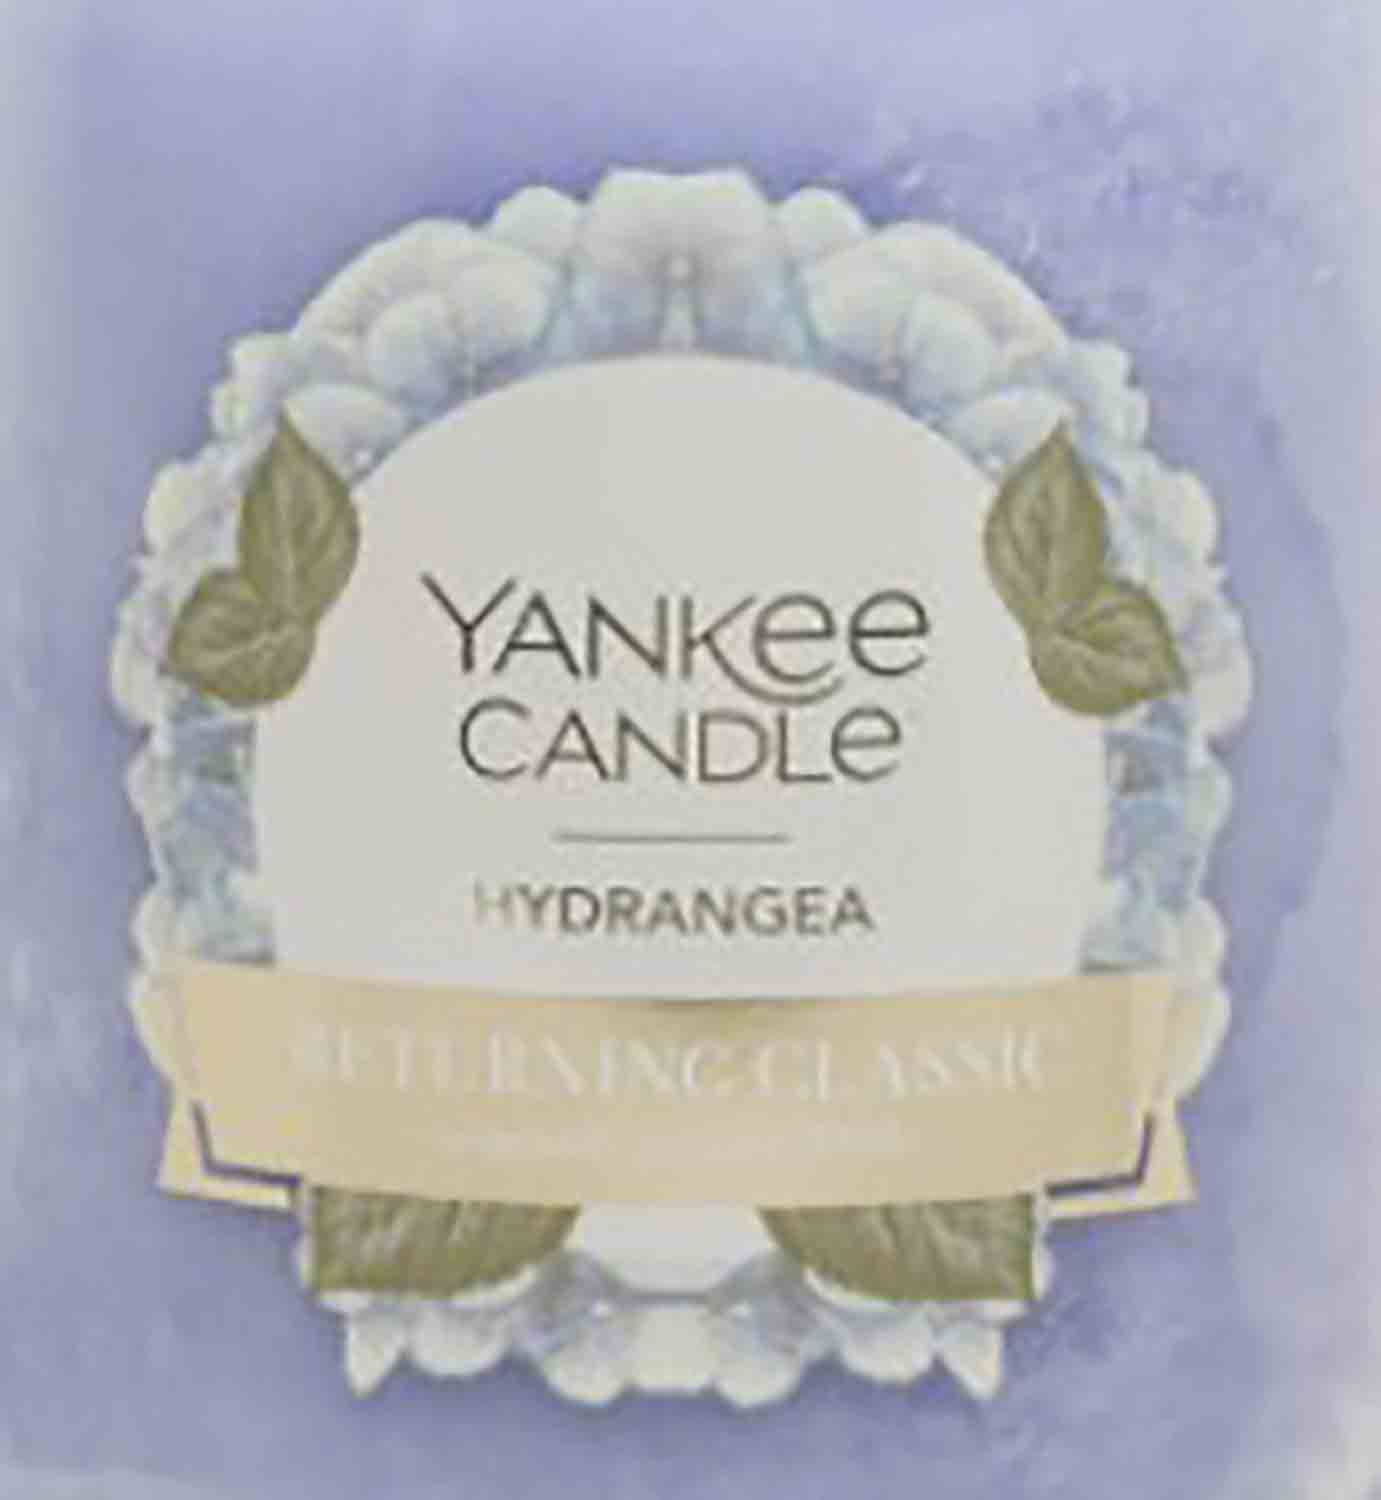 Yankee Candle Hydrangea 22g - Crumble vosk